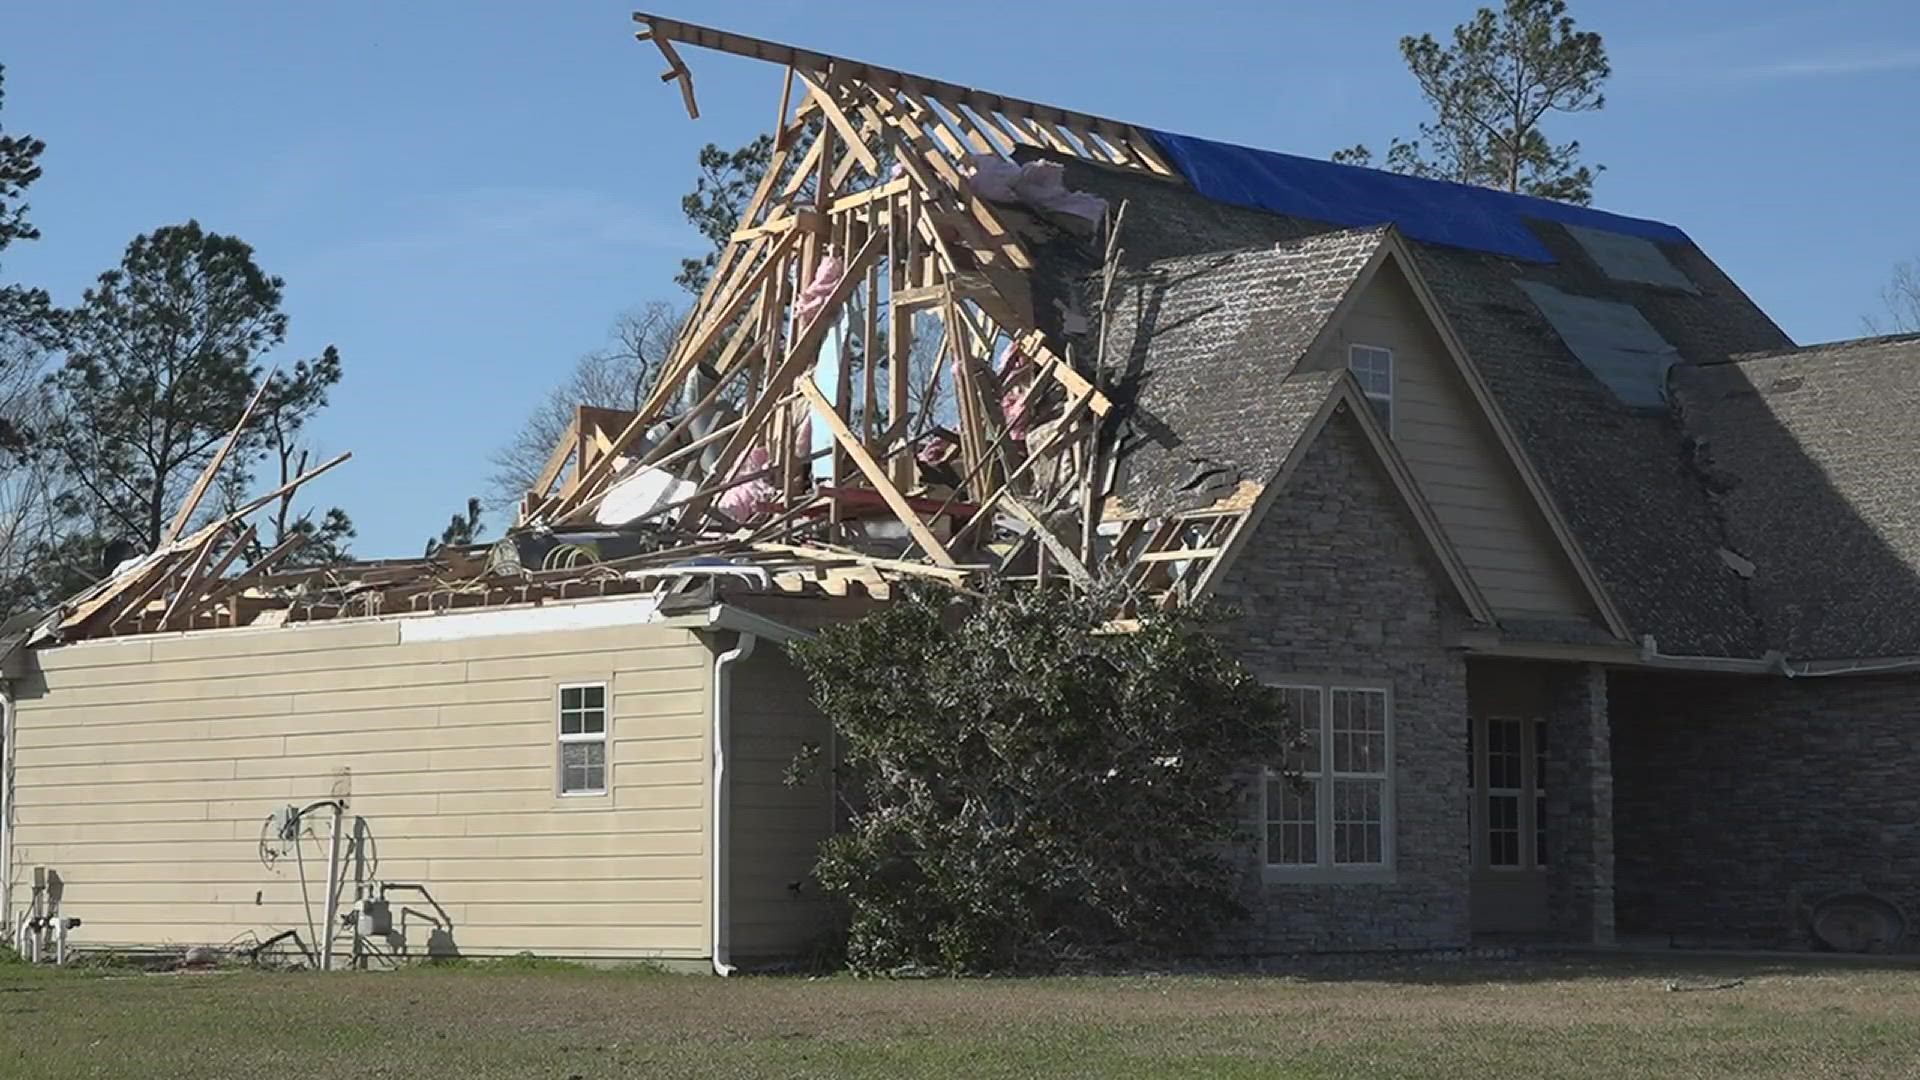 The Smith's are grateful to have insurance, but it's complicated. The tornado lifted and moved their house, which damaged the structure.